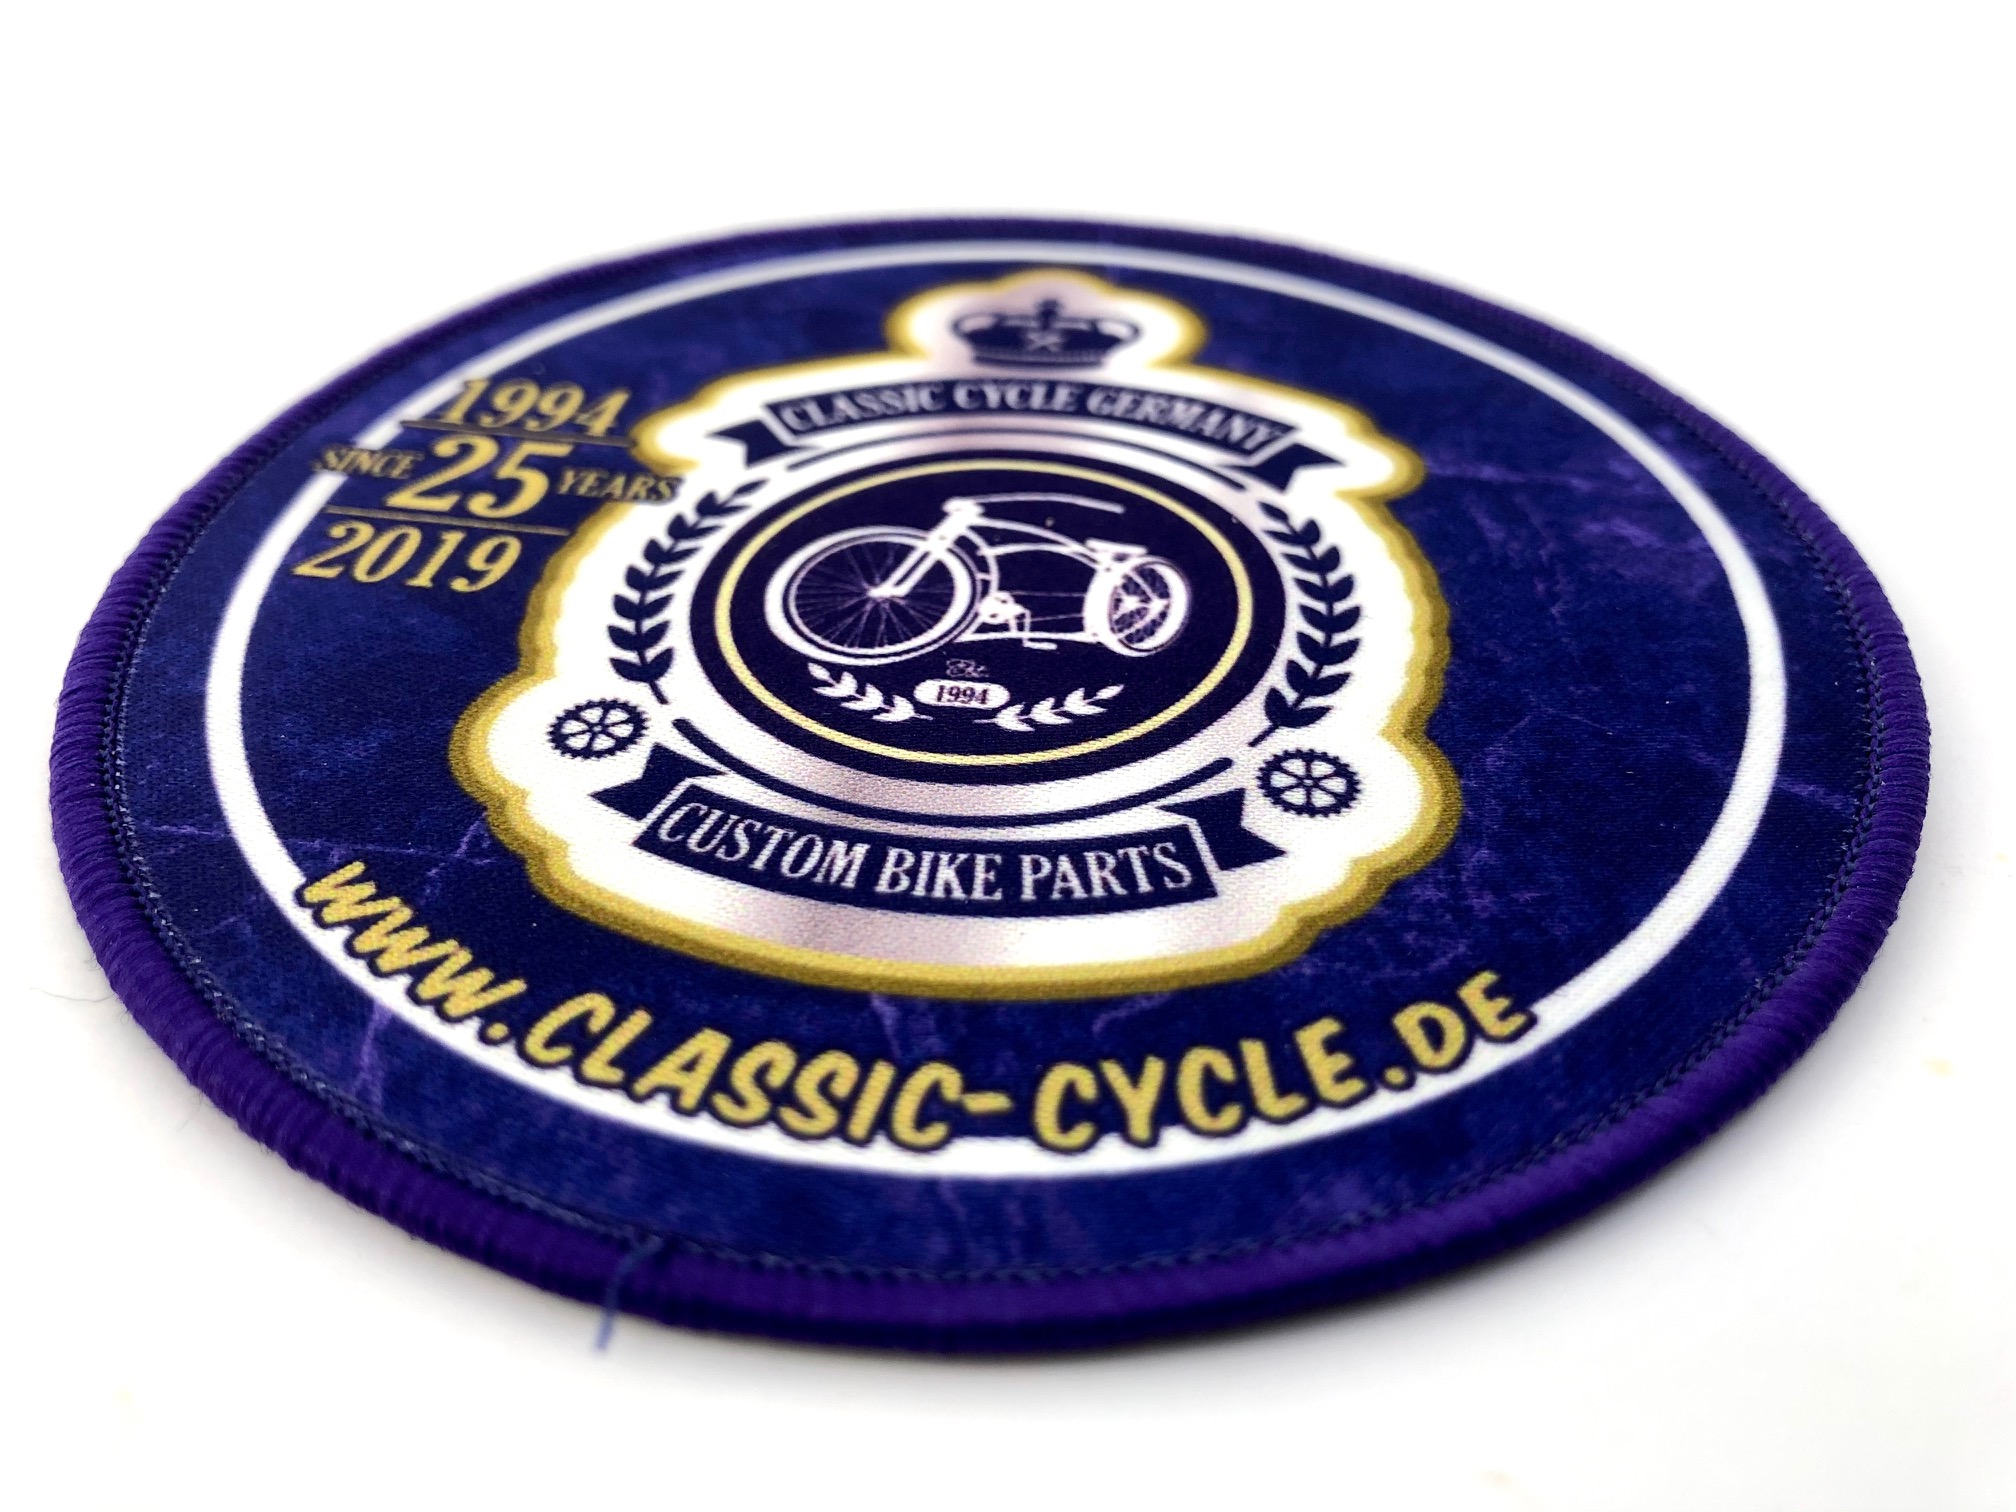 Patch Classic Cycle Original  Since 25 Years